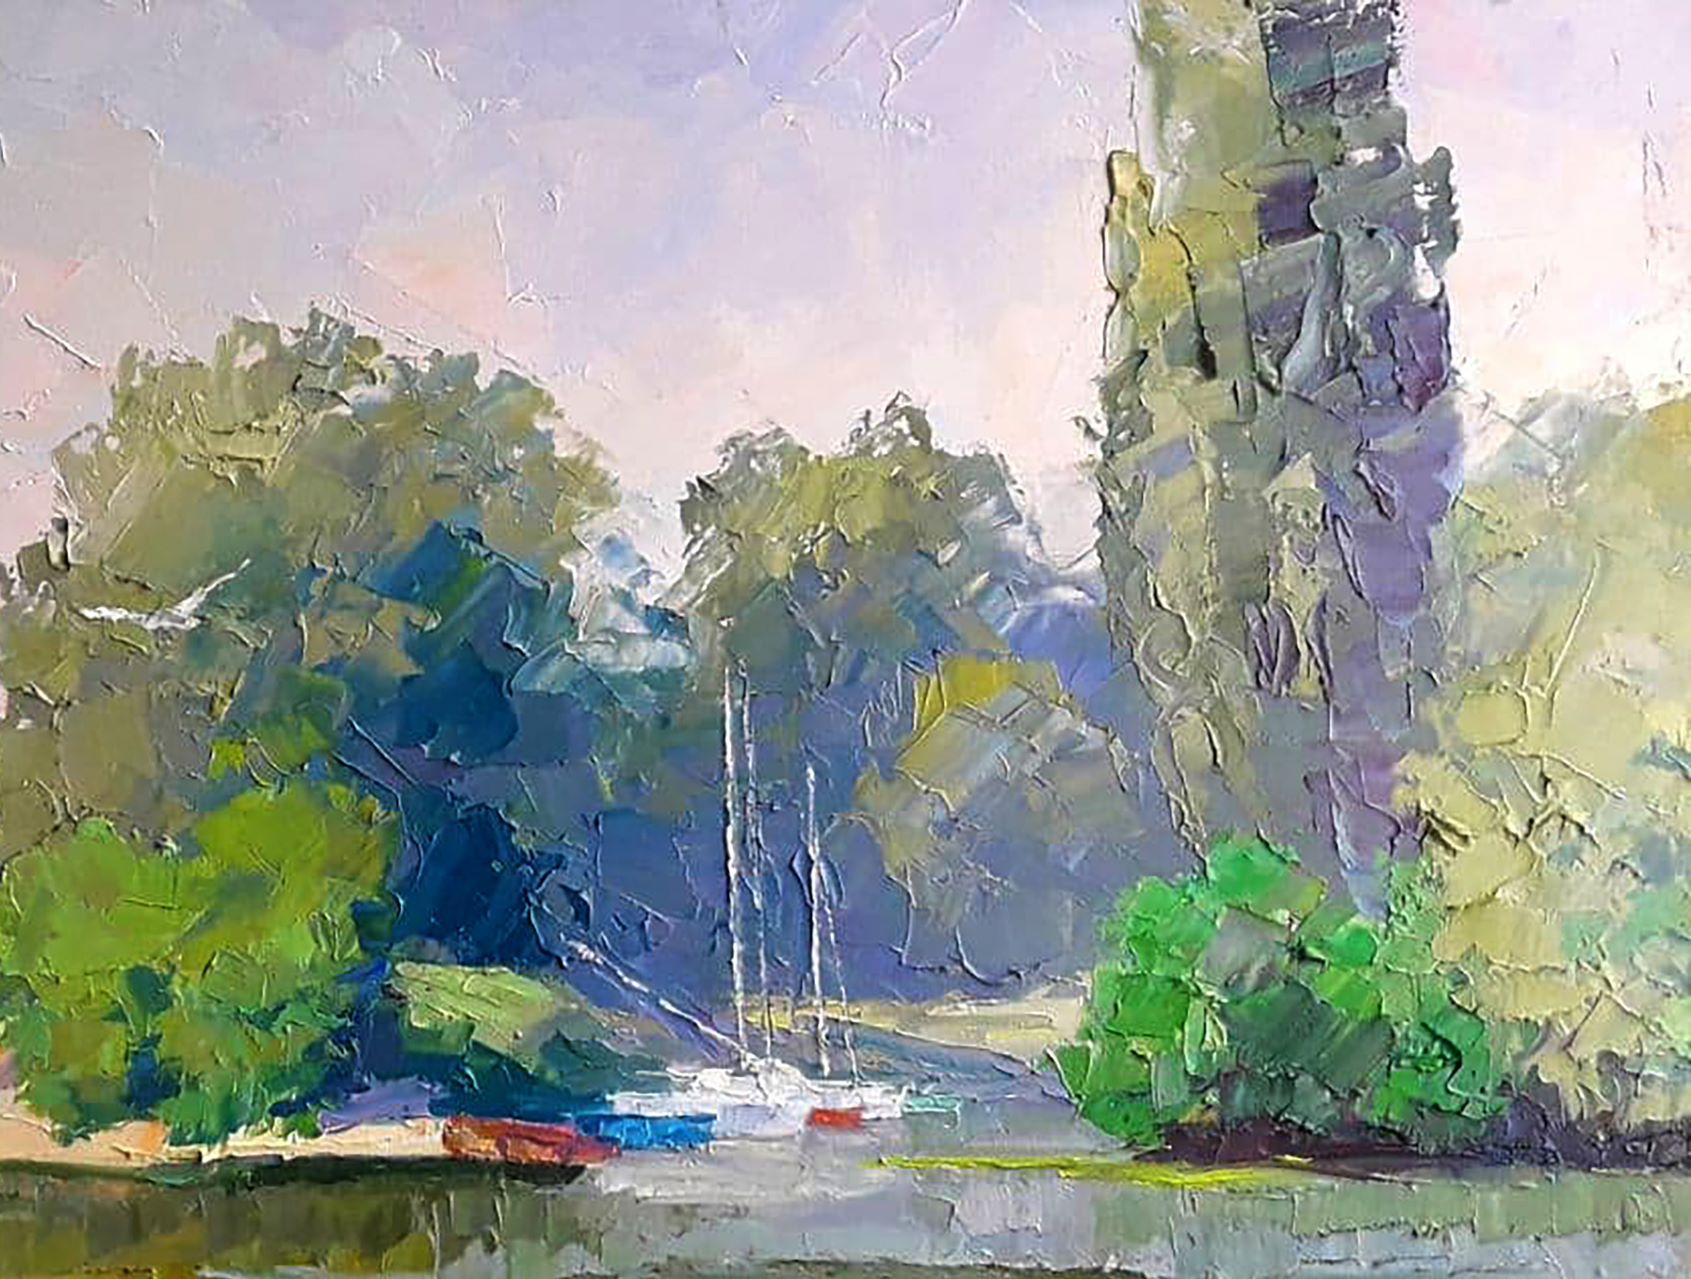 Yachts on the Dnieper, Landscape, Original oil Painting, Ready to Hang - Gray Landscape Painting by Boris Serdyuk 